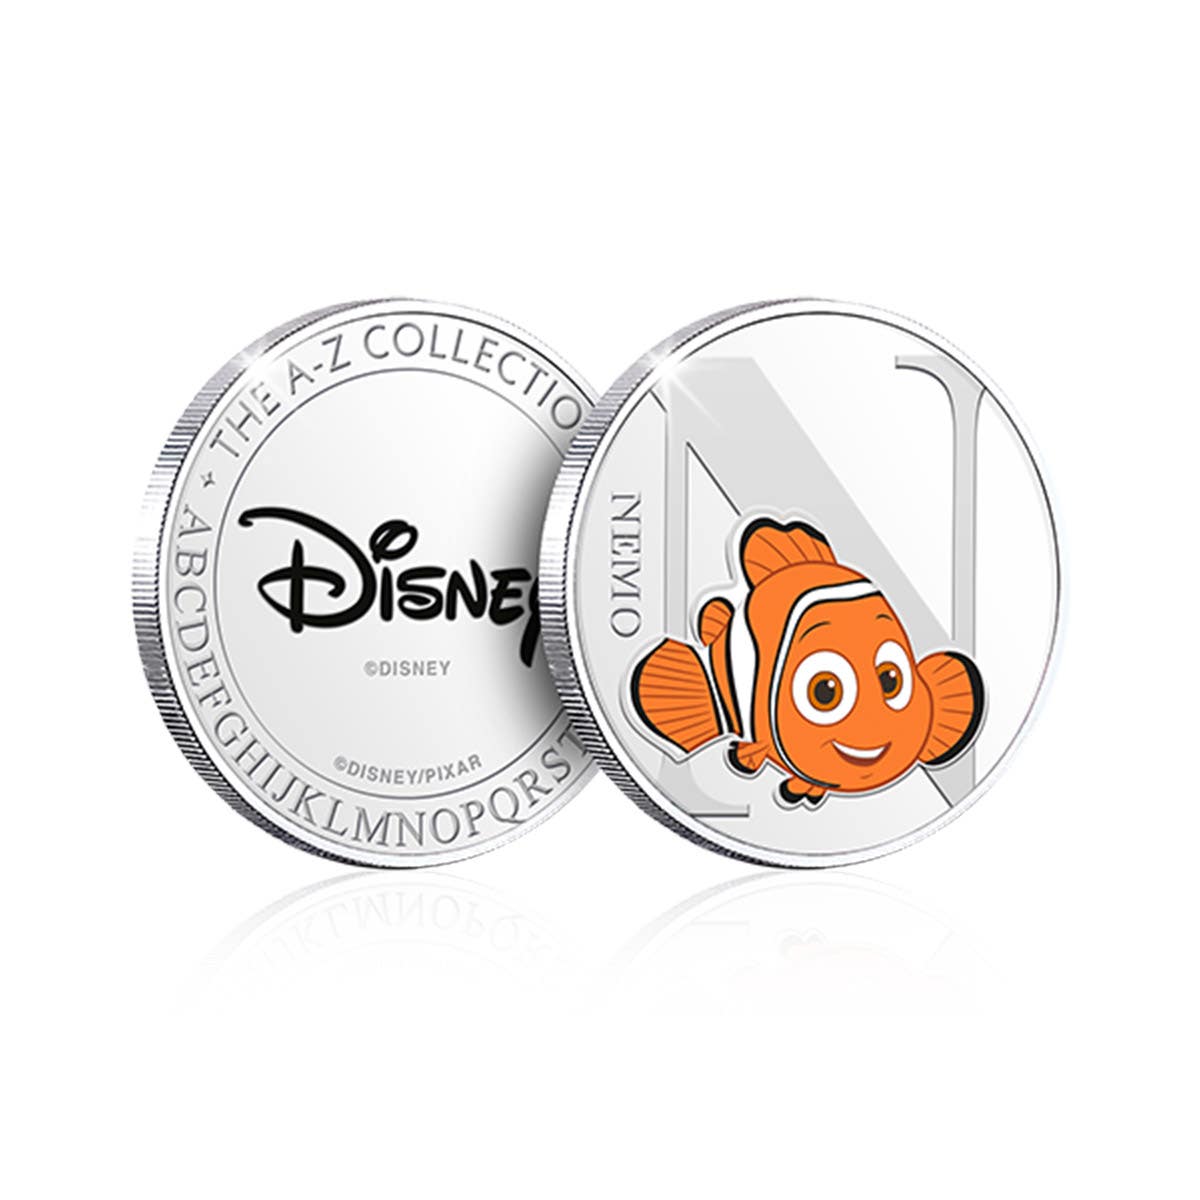 Disney N is for Nemo Silver-Plated Commemorative